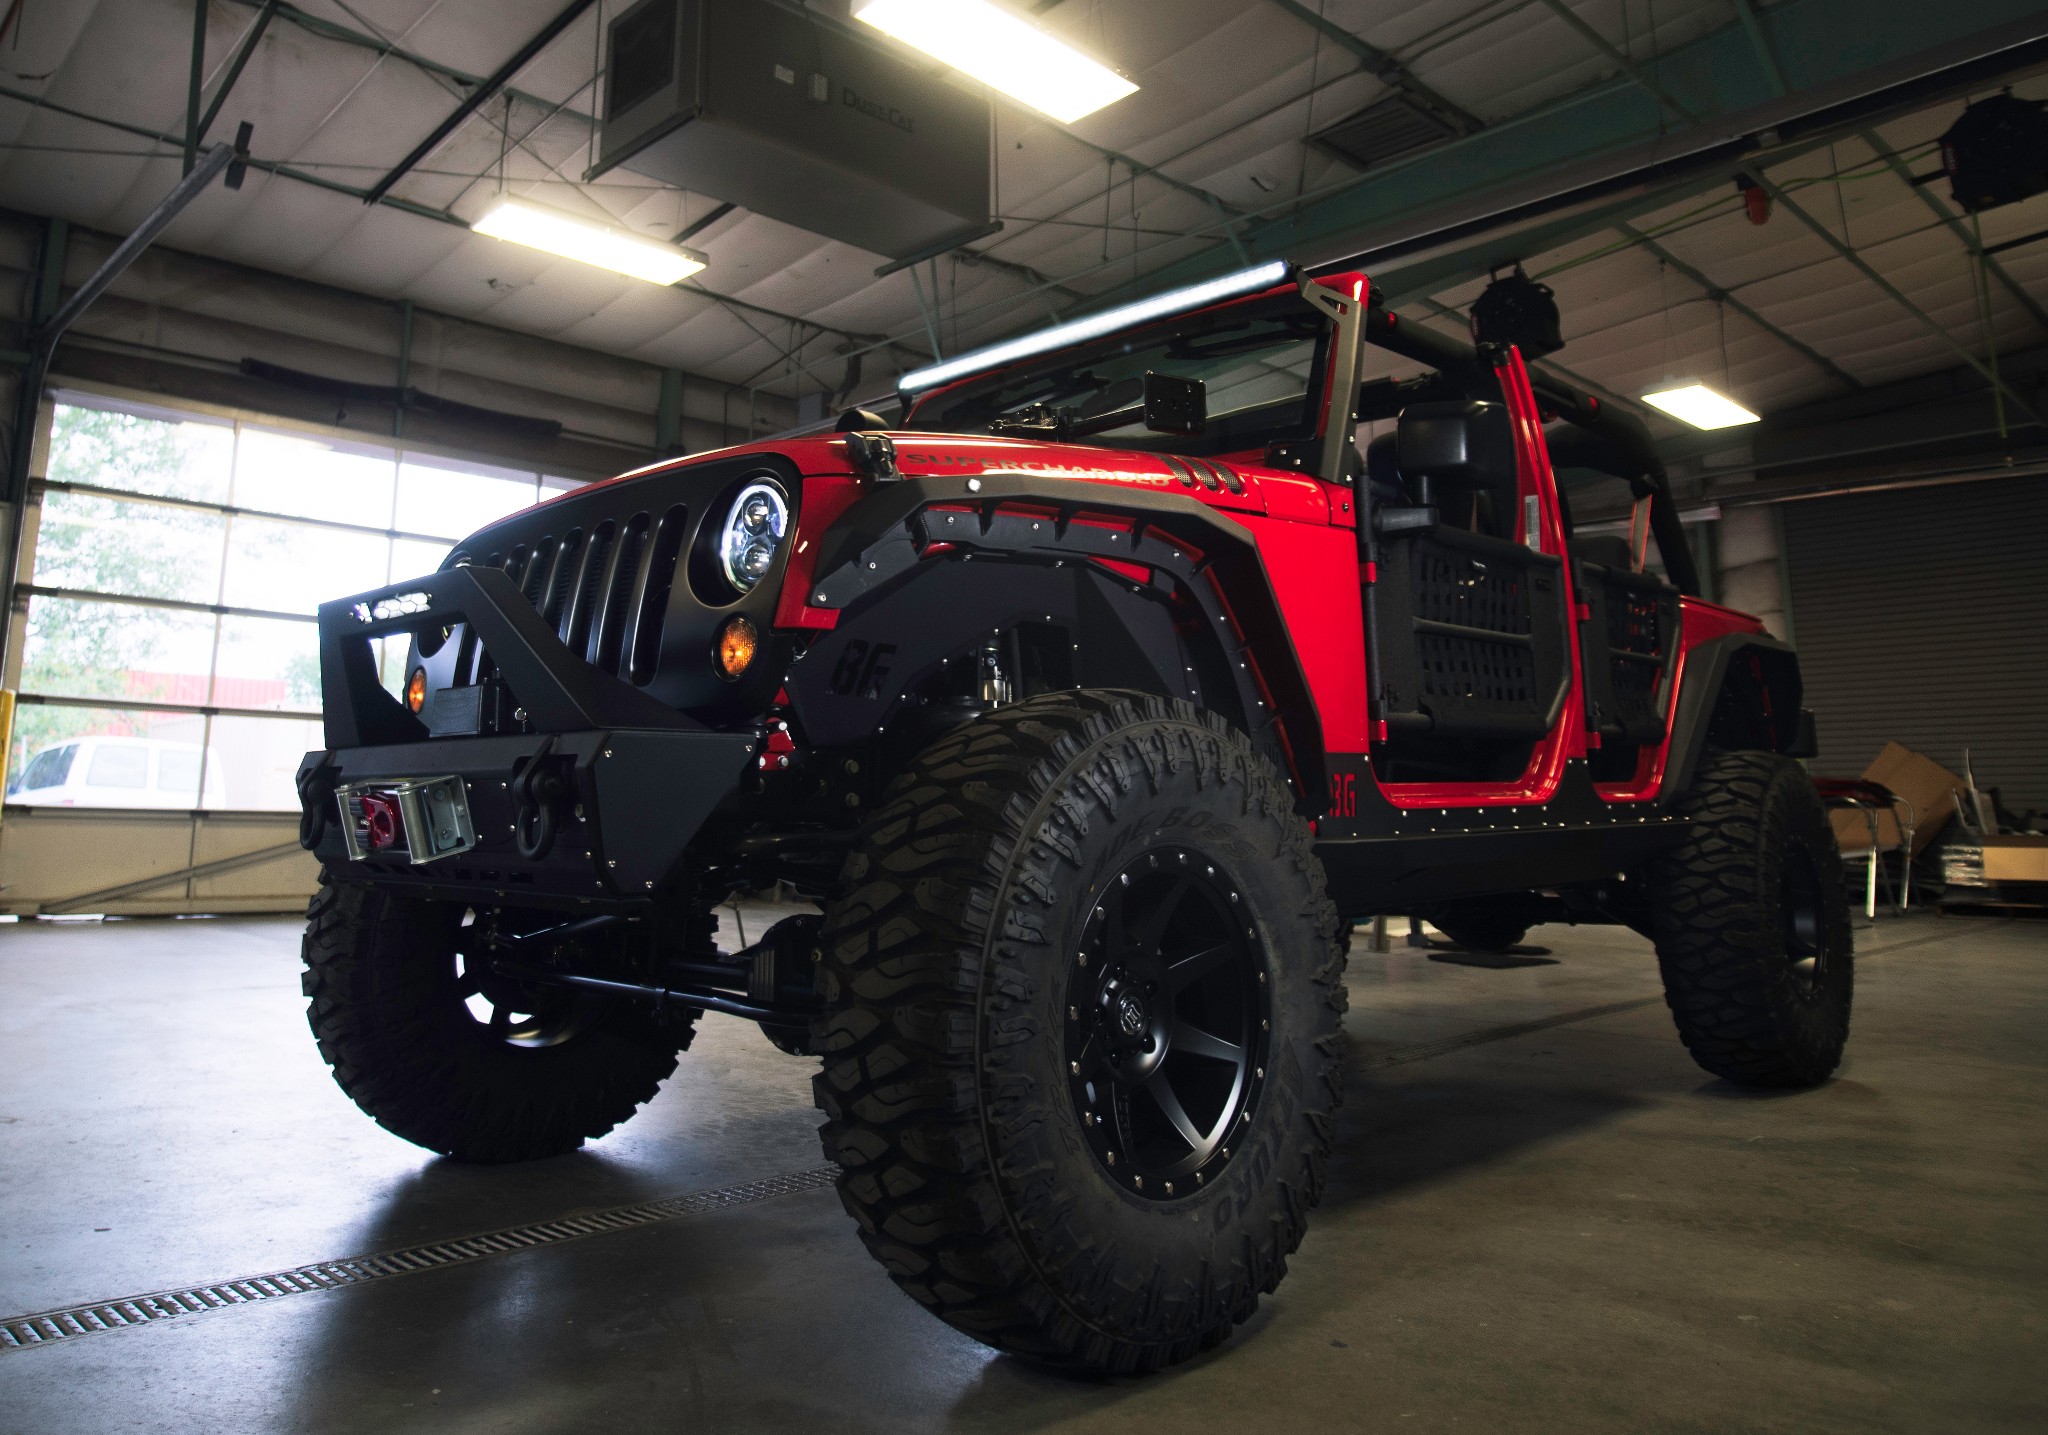 Jeep Wrangler built by students